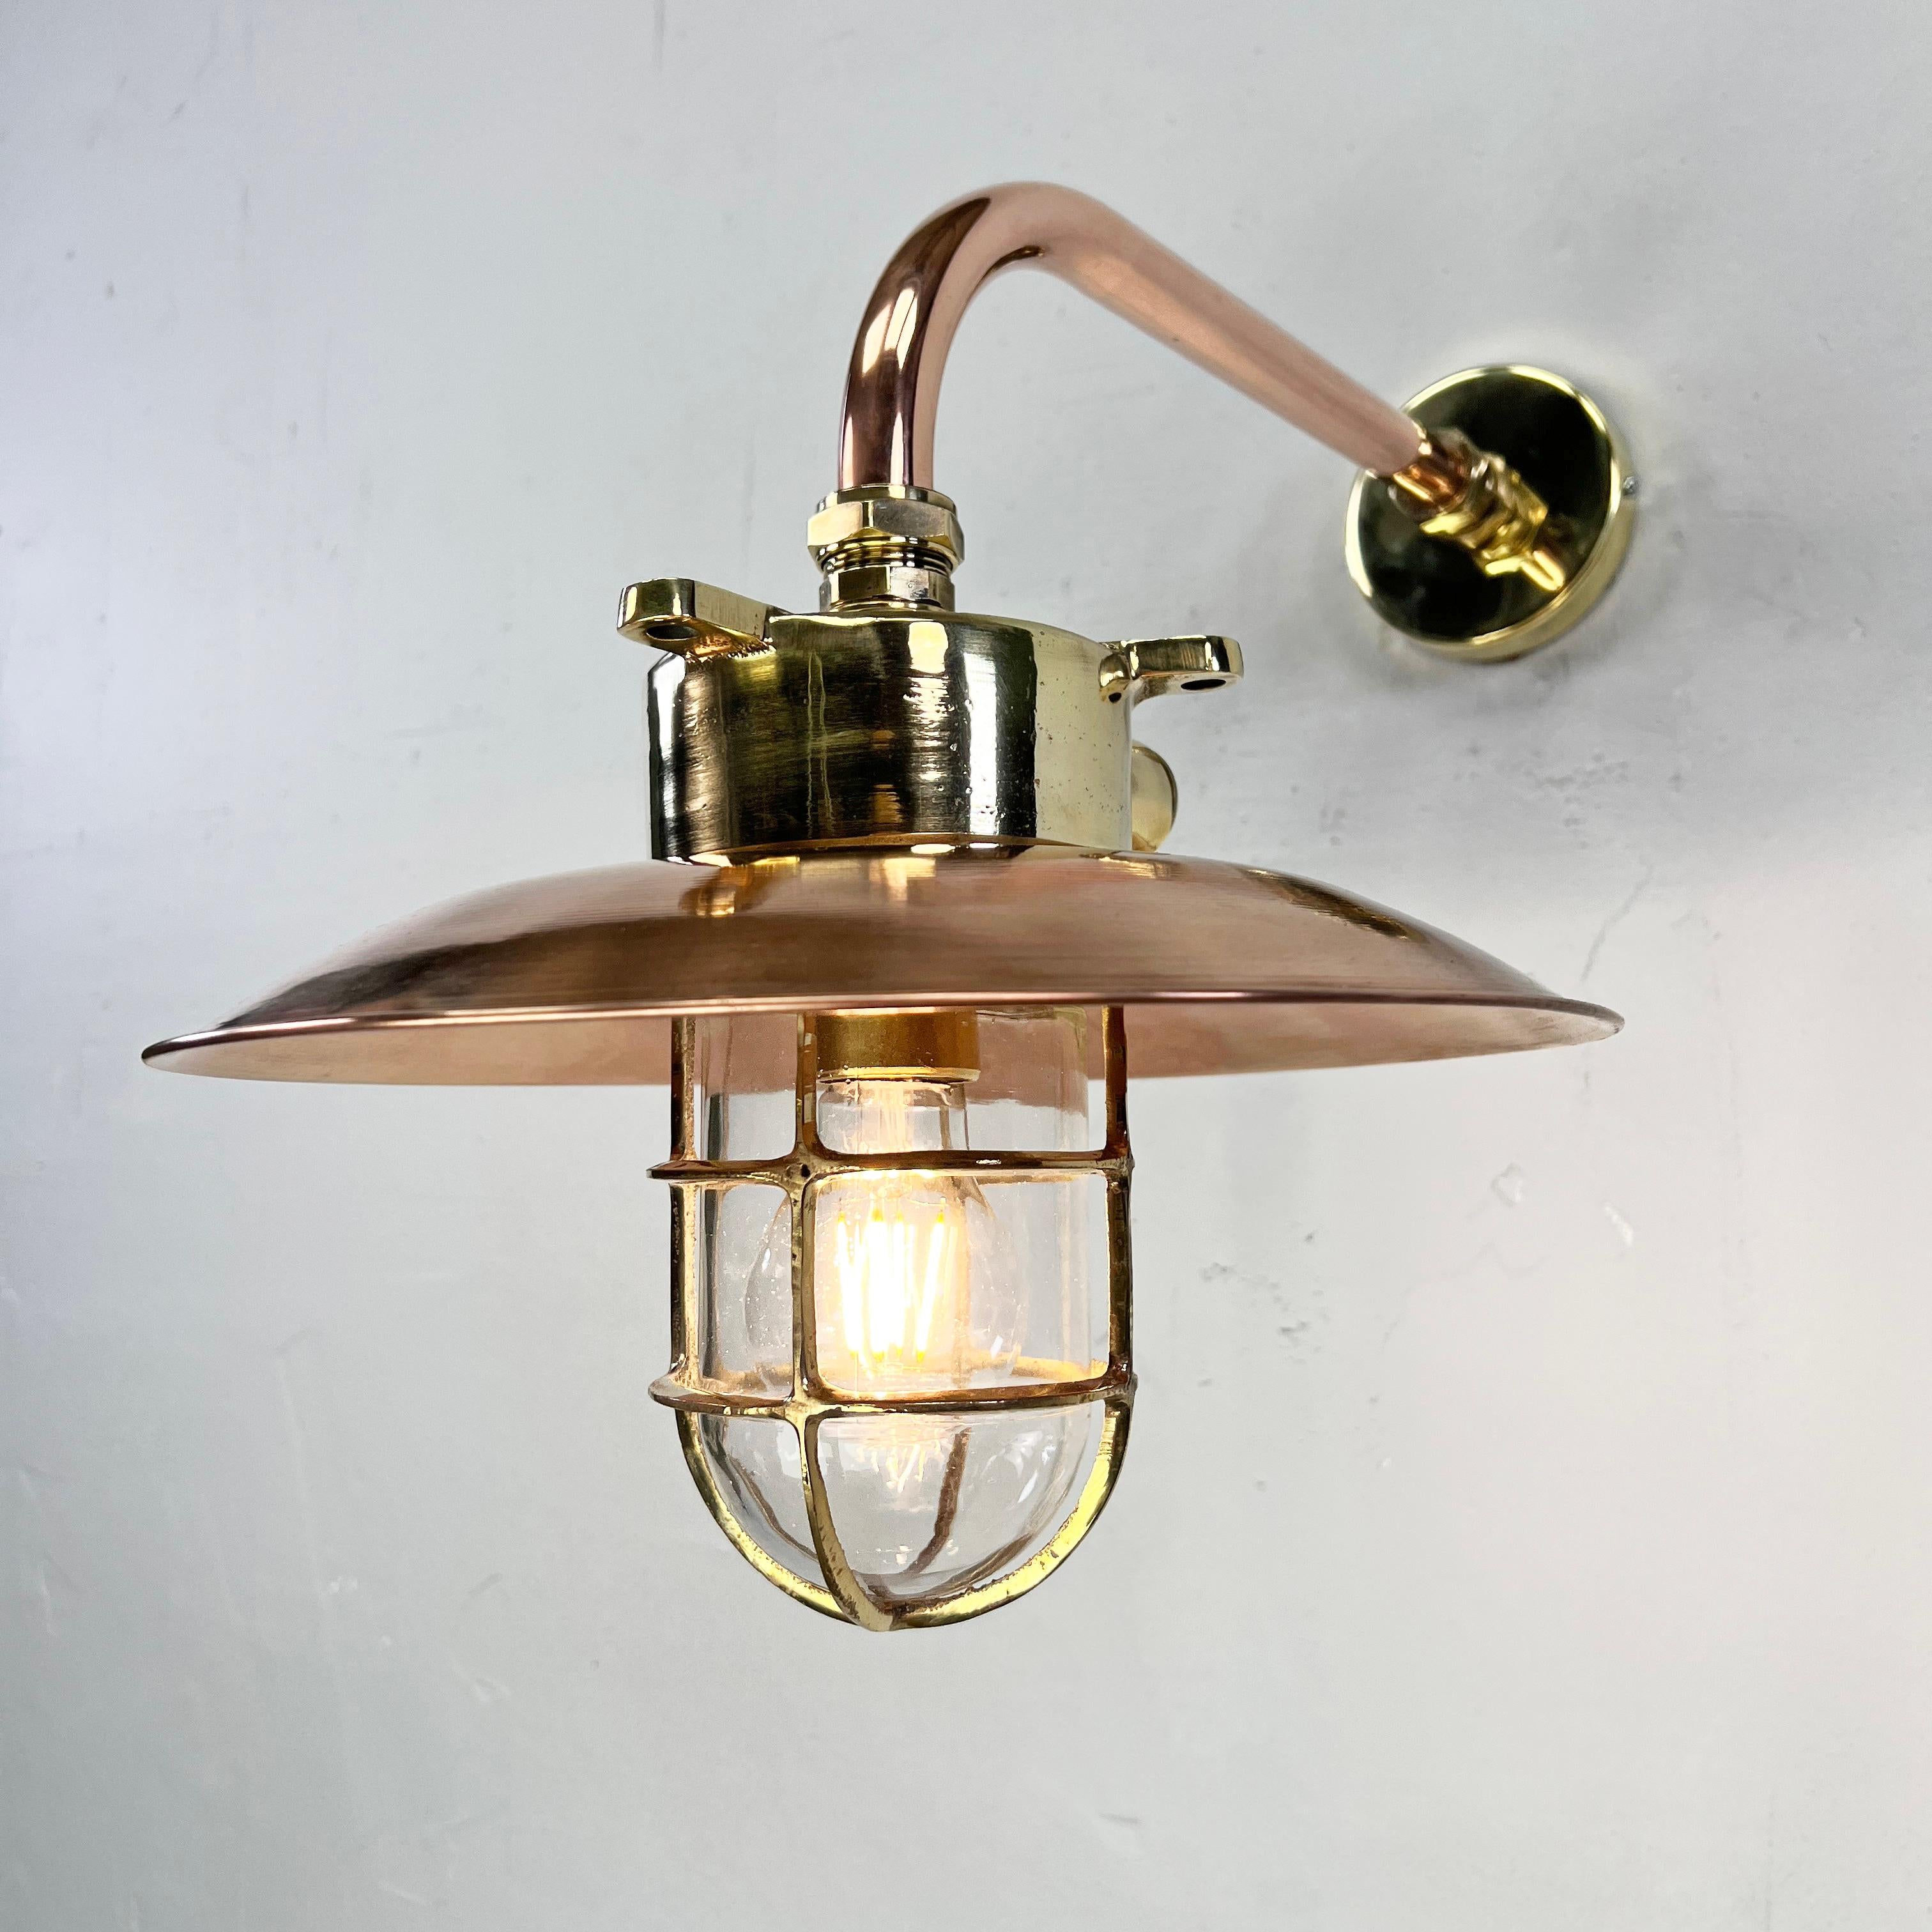 1970s Japanese Cast Brass and Copper Explosion Proof Caged Cantilever Wall Light For Sale 11